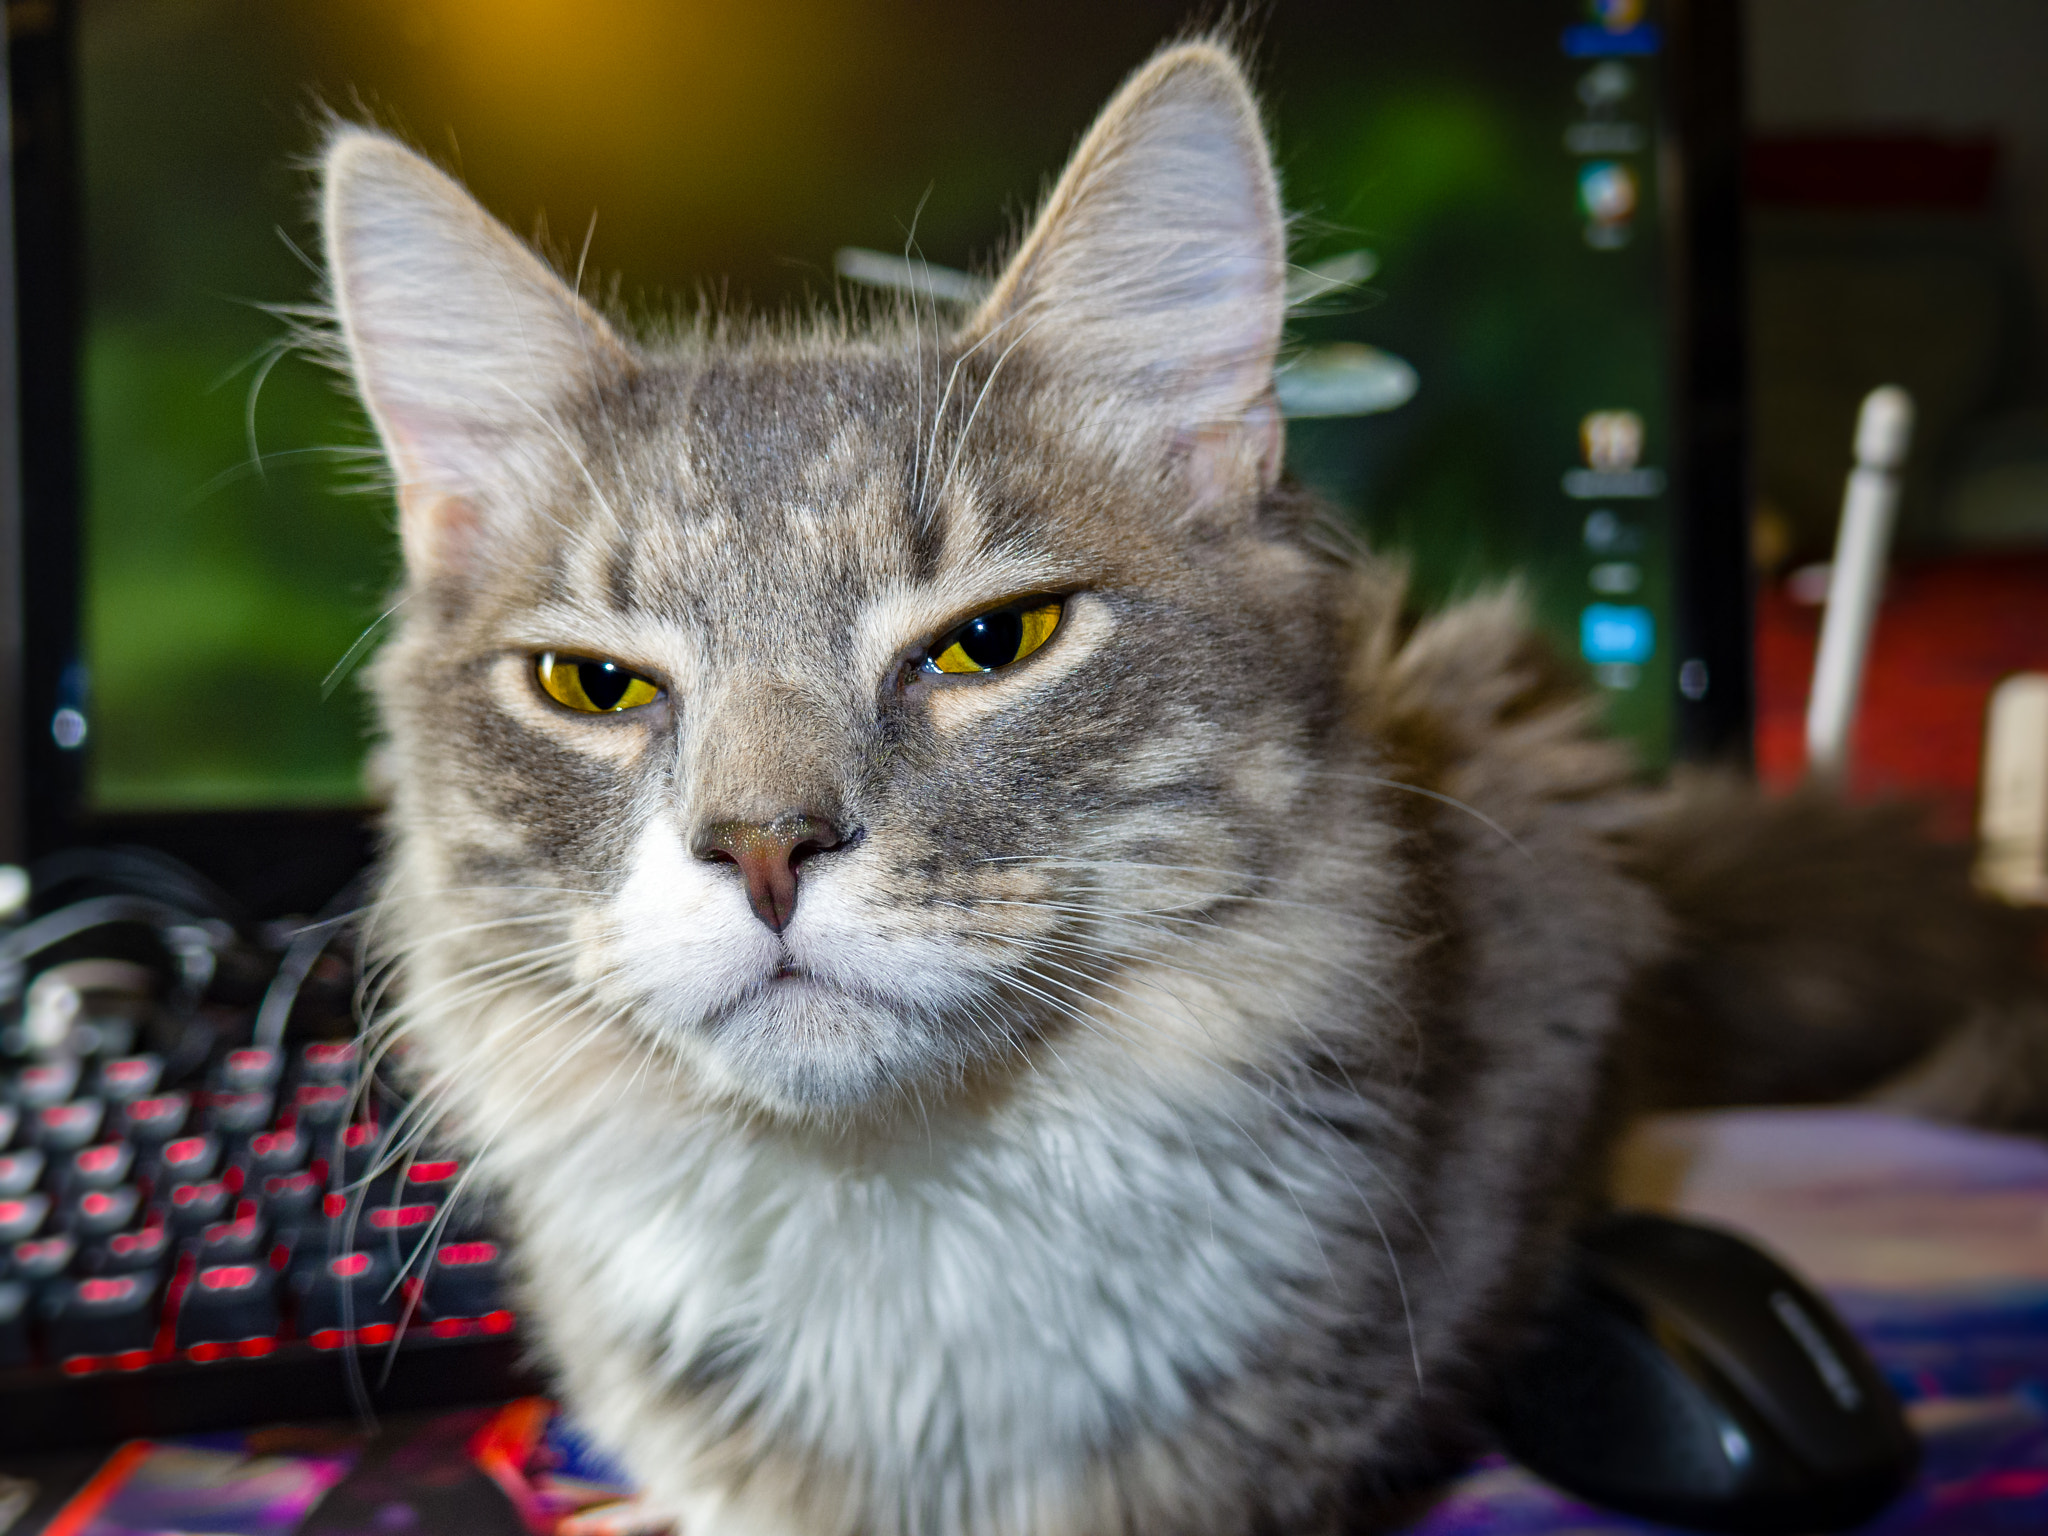 Pentax Q7 sample photo. Mittens does not approve photography